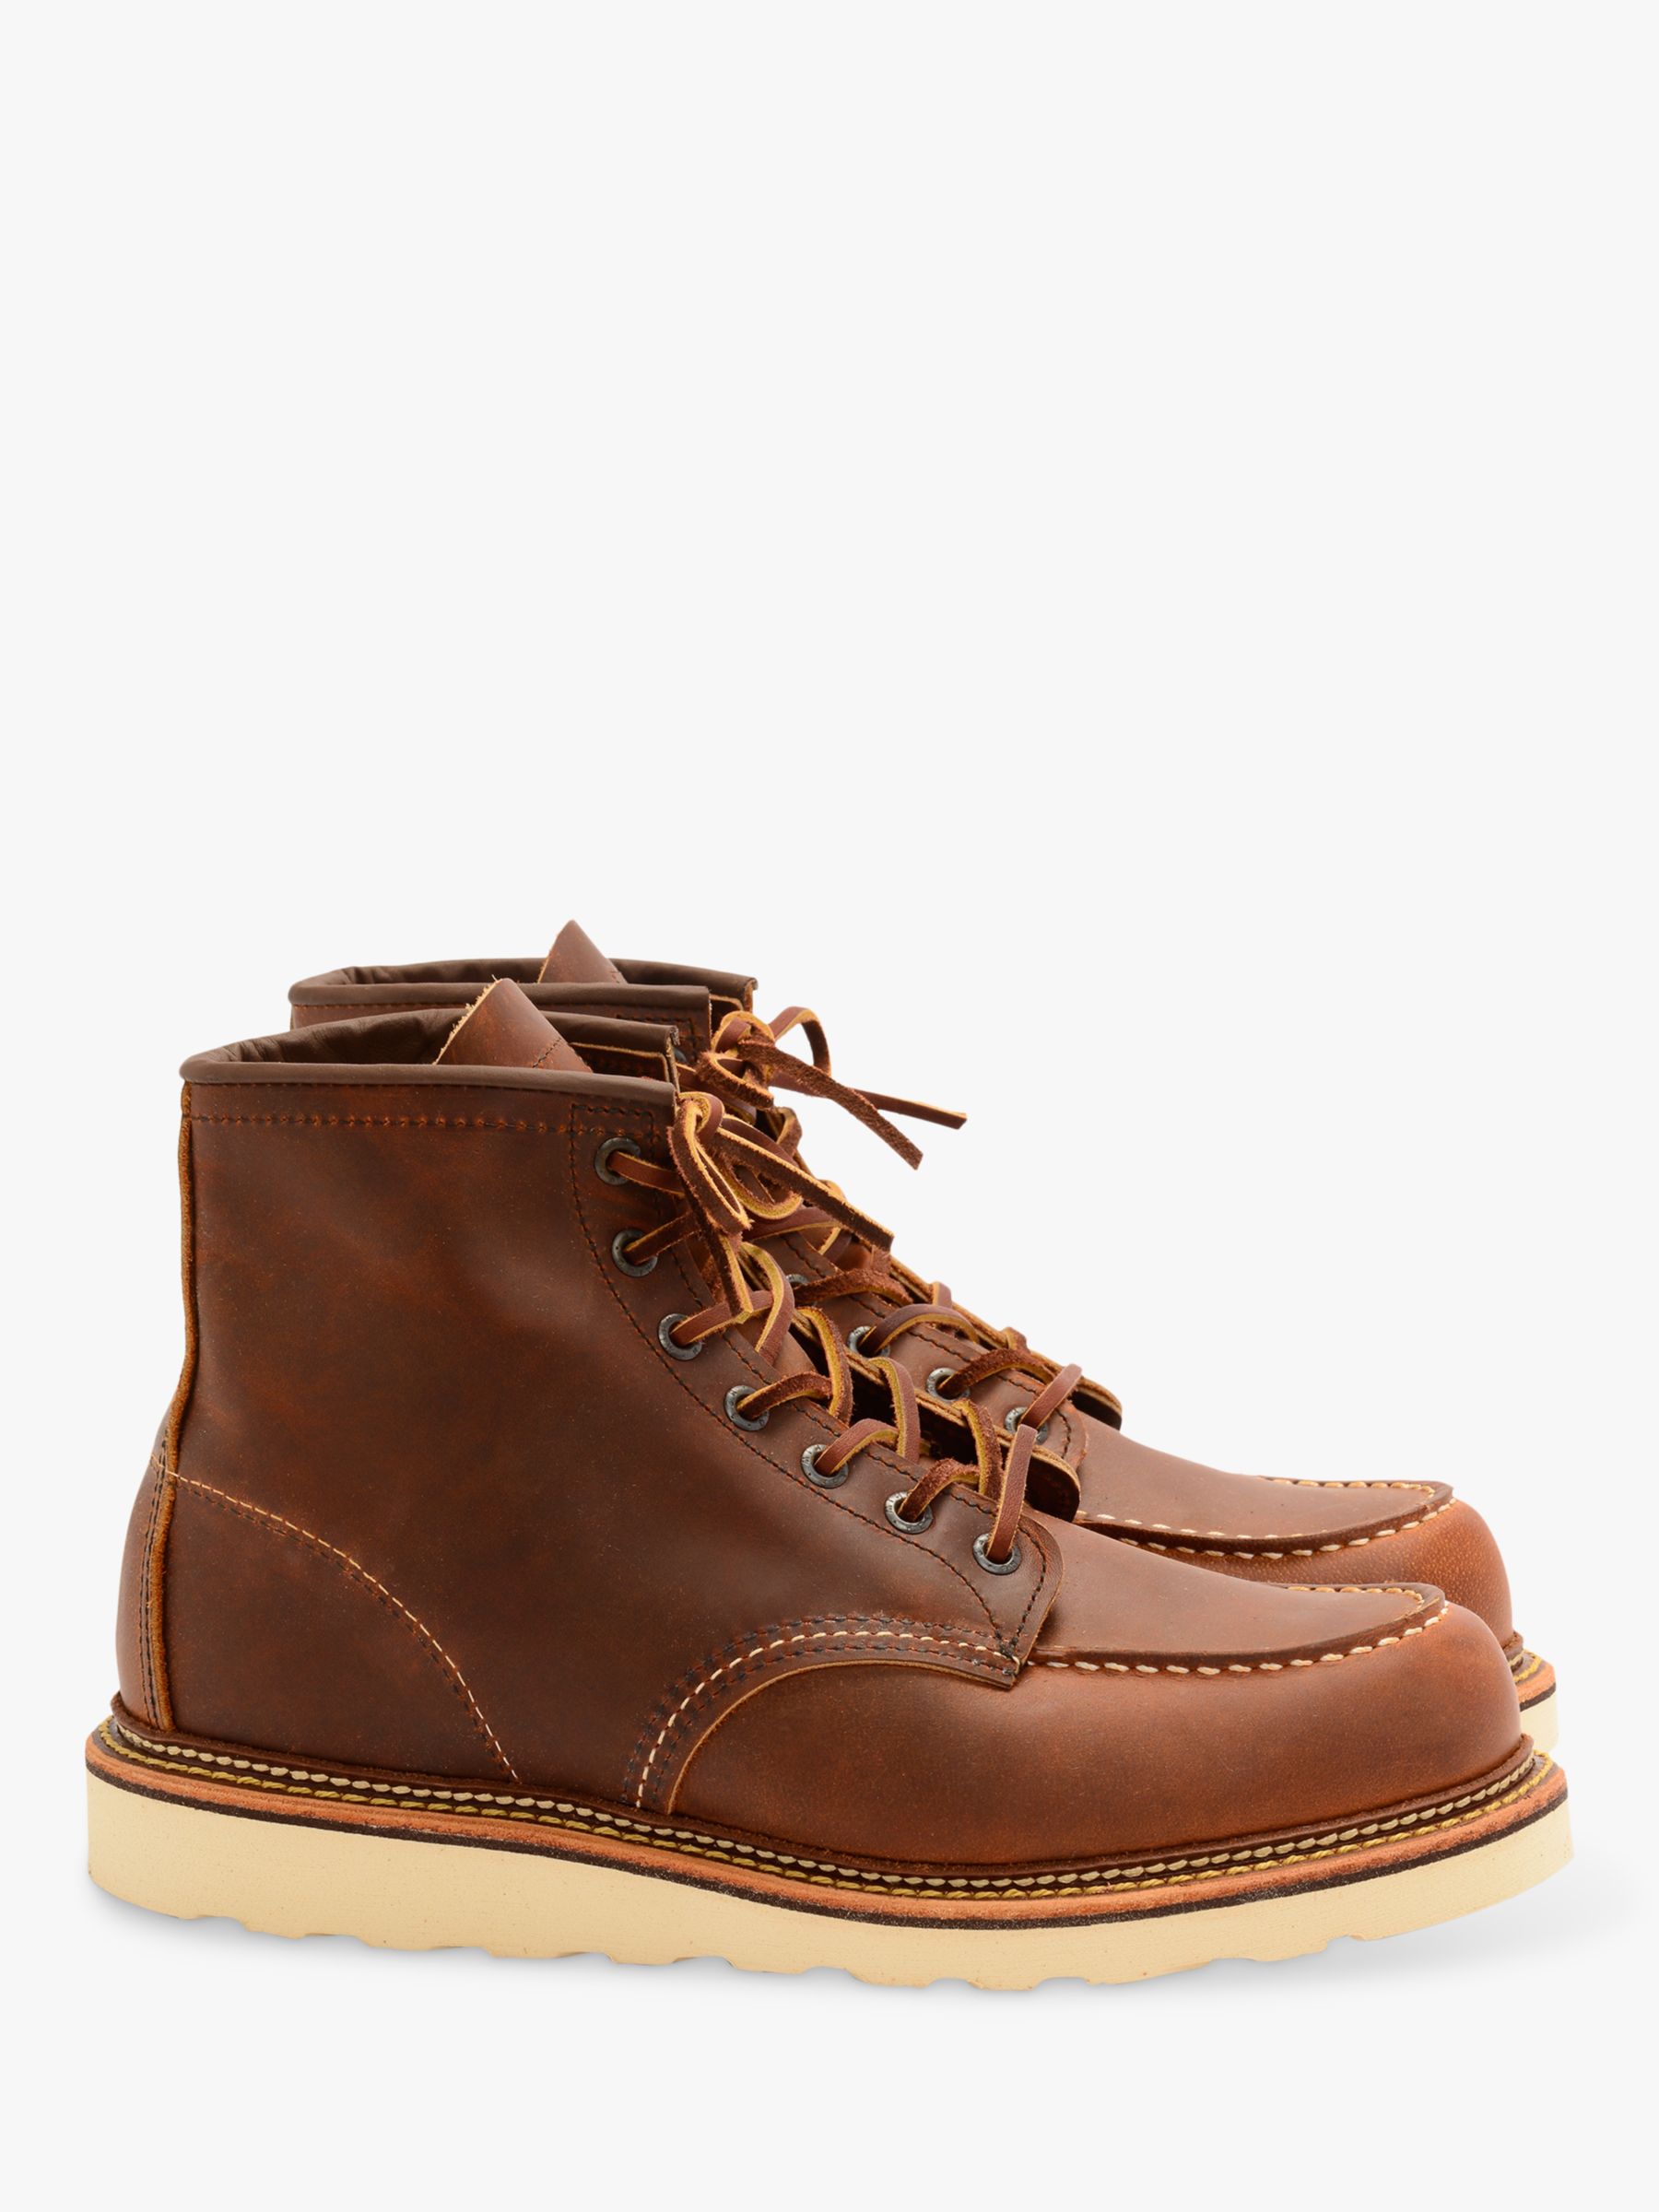 cyber monday red wing boots